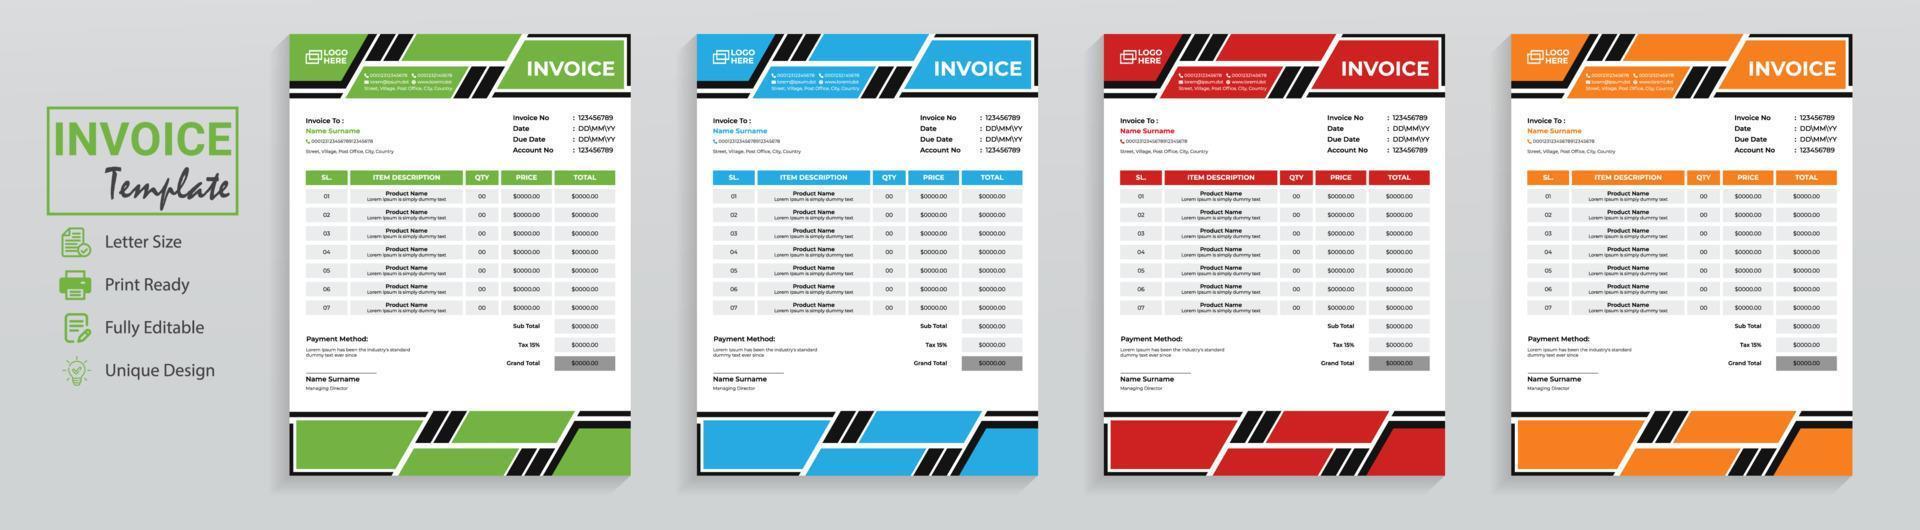 Modern Invoice Template. White background editable text invoice templates vector design table for bill form, sale receipt. This accounting print document has clean minimal look with 4 color variations